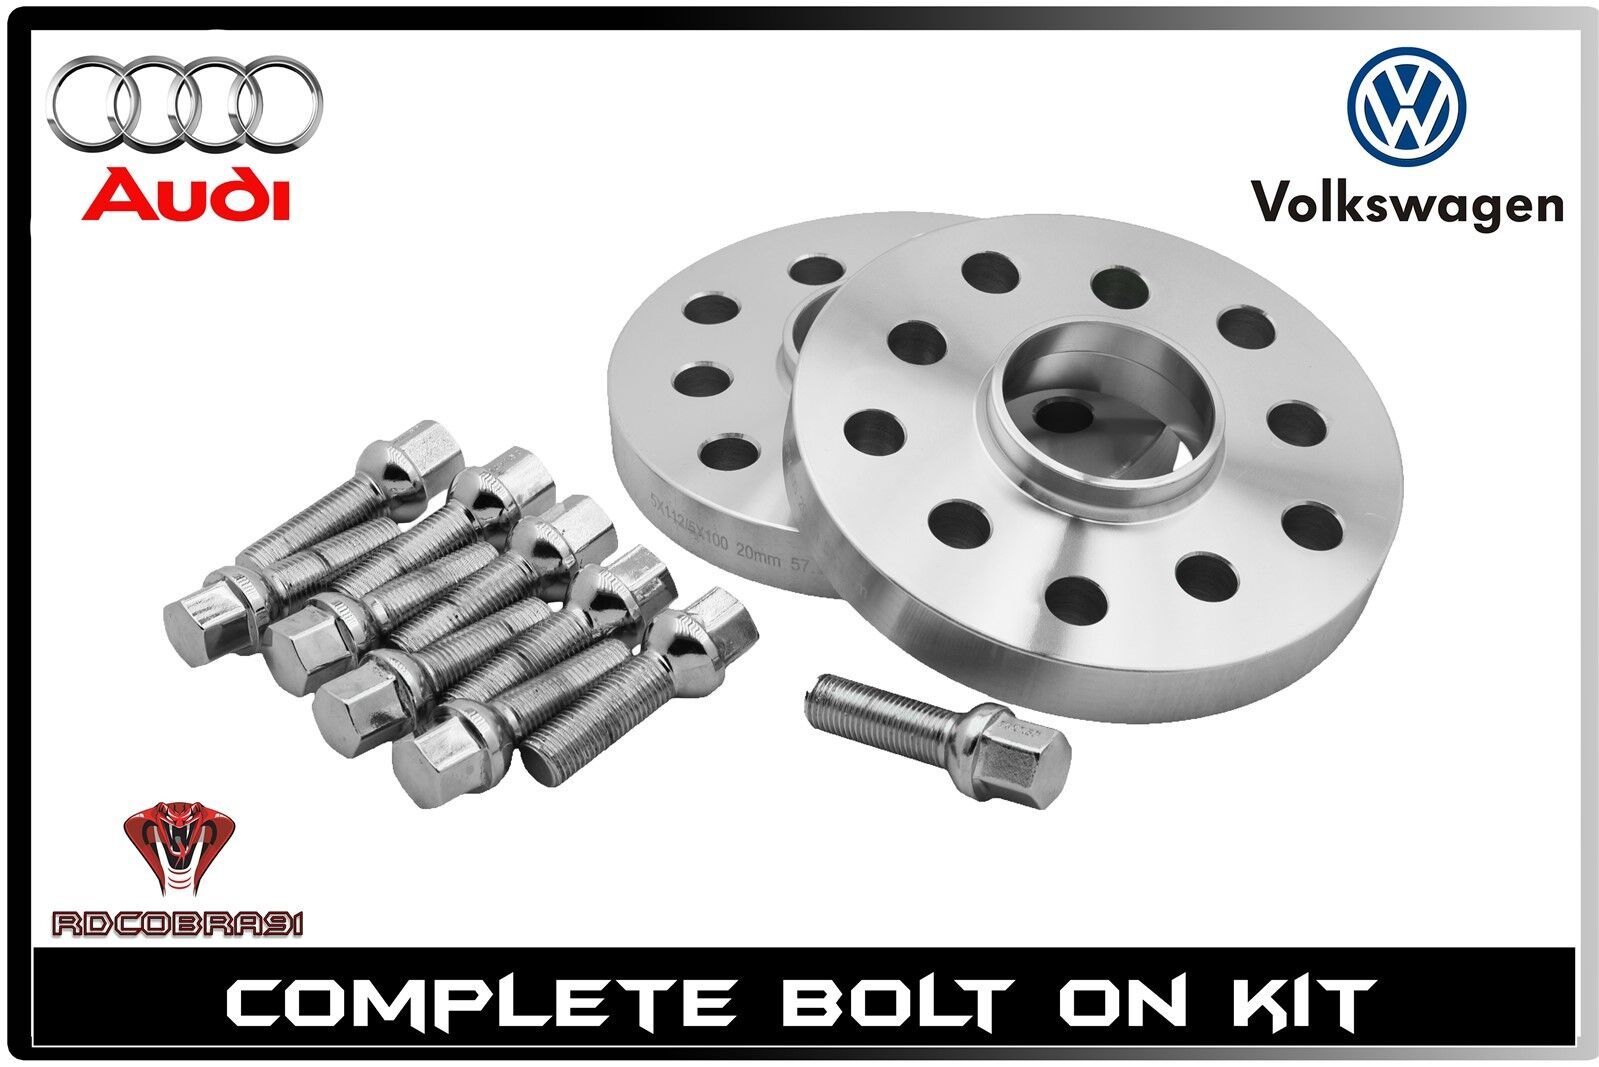 2pc Hub Centric Wheel Spacers Kit 15mm Thick 5x100 / 5x112 For Audi & Volkswagen